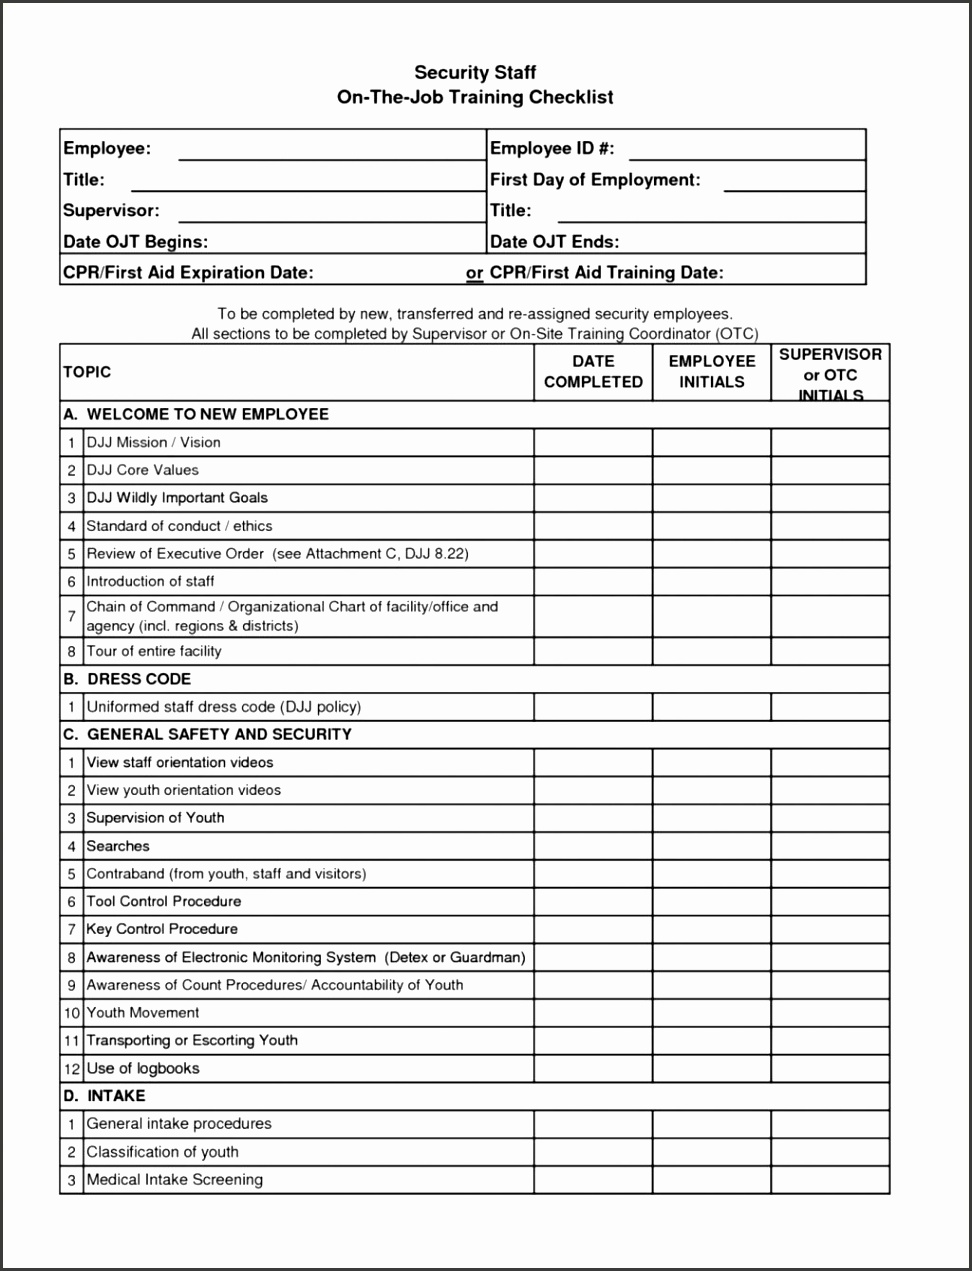 Constructionnt Form Project Checklist Template Excel Meeting Cleaning Schedule Contract Plan